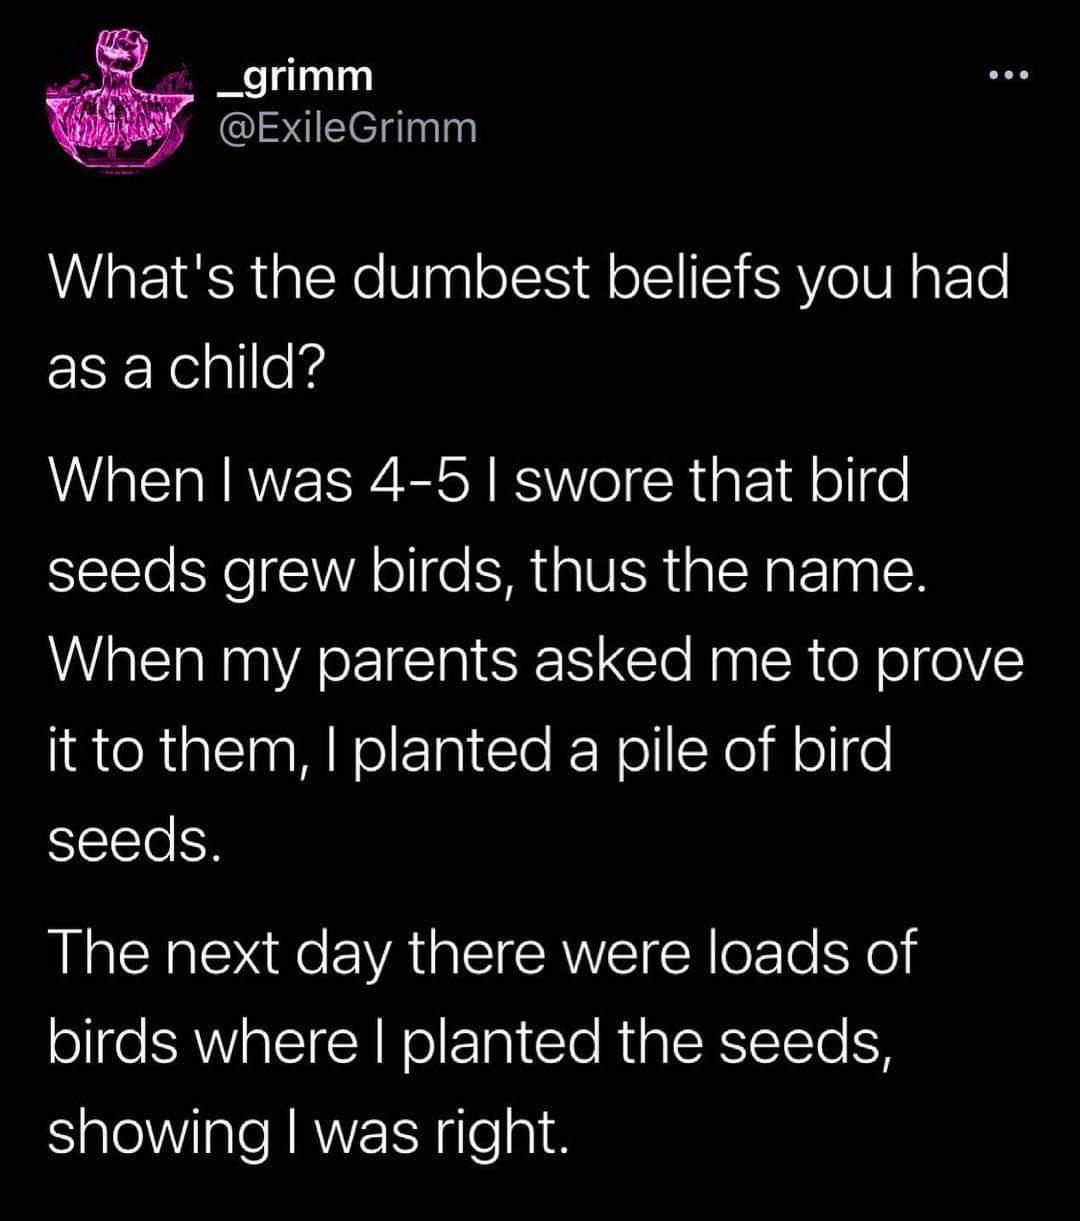 monday morning randomness - Comics - _grimm Grimm What's the dumbest beliefs you had as a child? When I was 45 I swore that bird seeds grew birds, thus the name. When my parents asked me to prove it to them, I planted a pile of bird seeds. The next day th